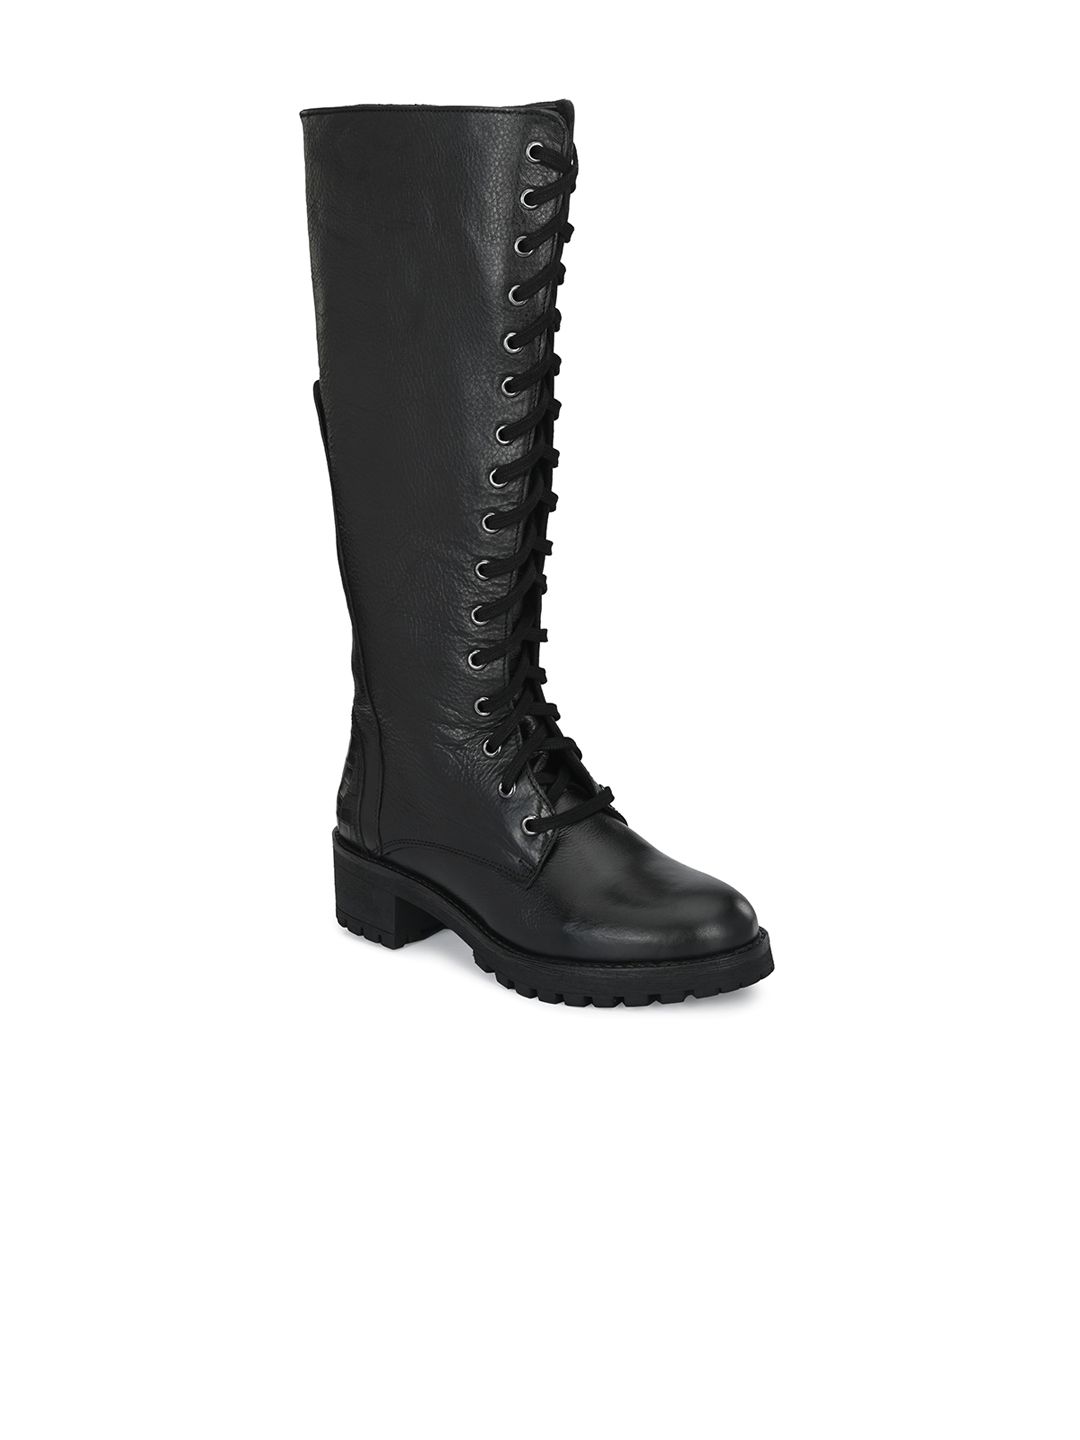 Delize Black Leather Party High-Top Block Heeled Boots Price in India